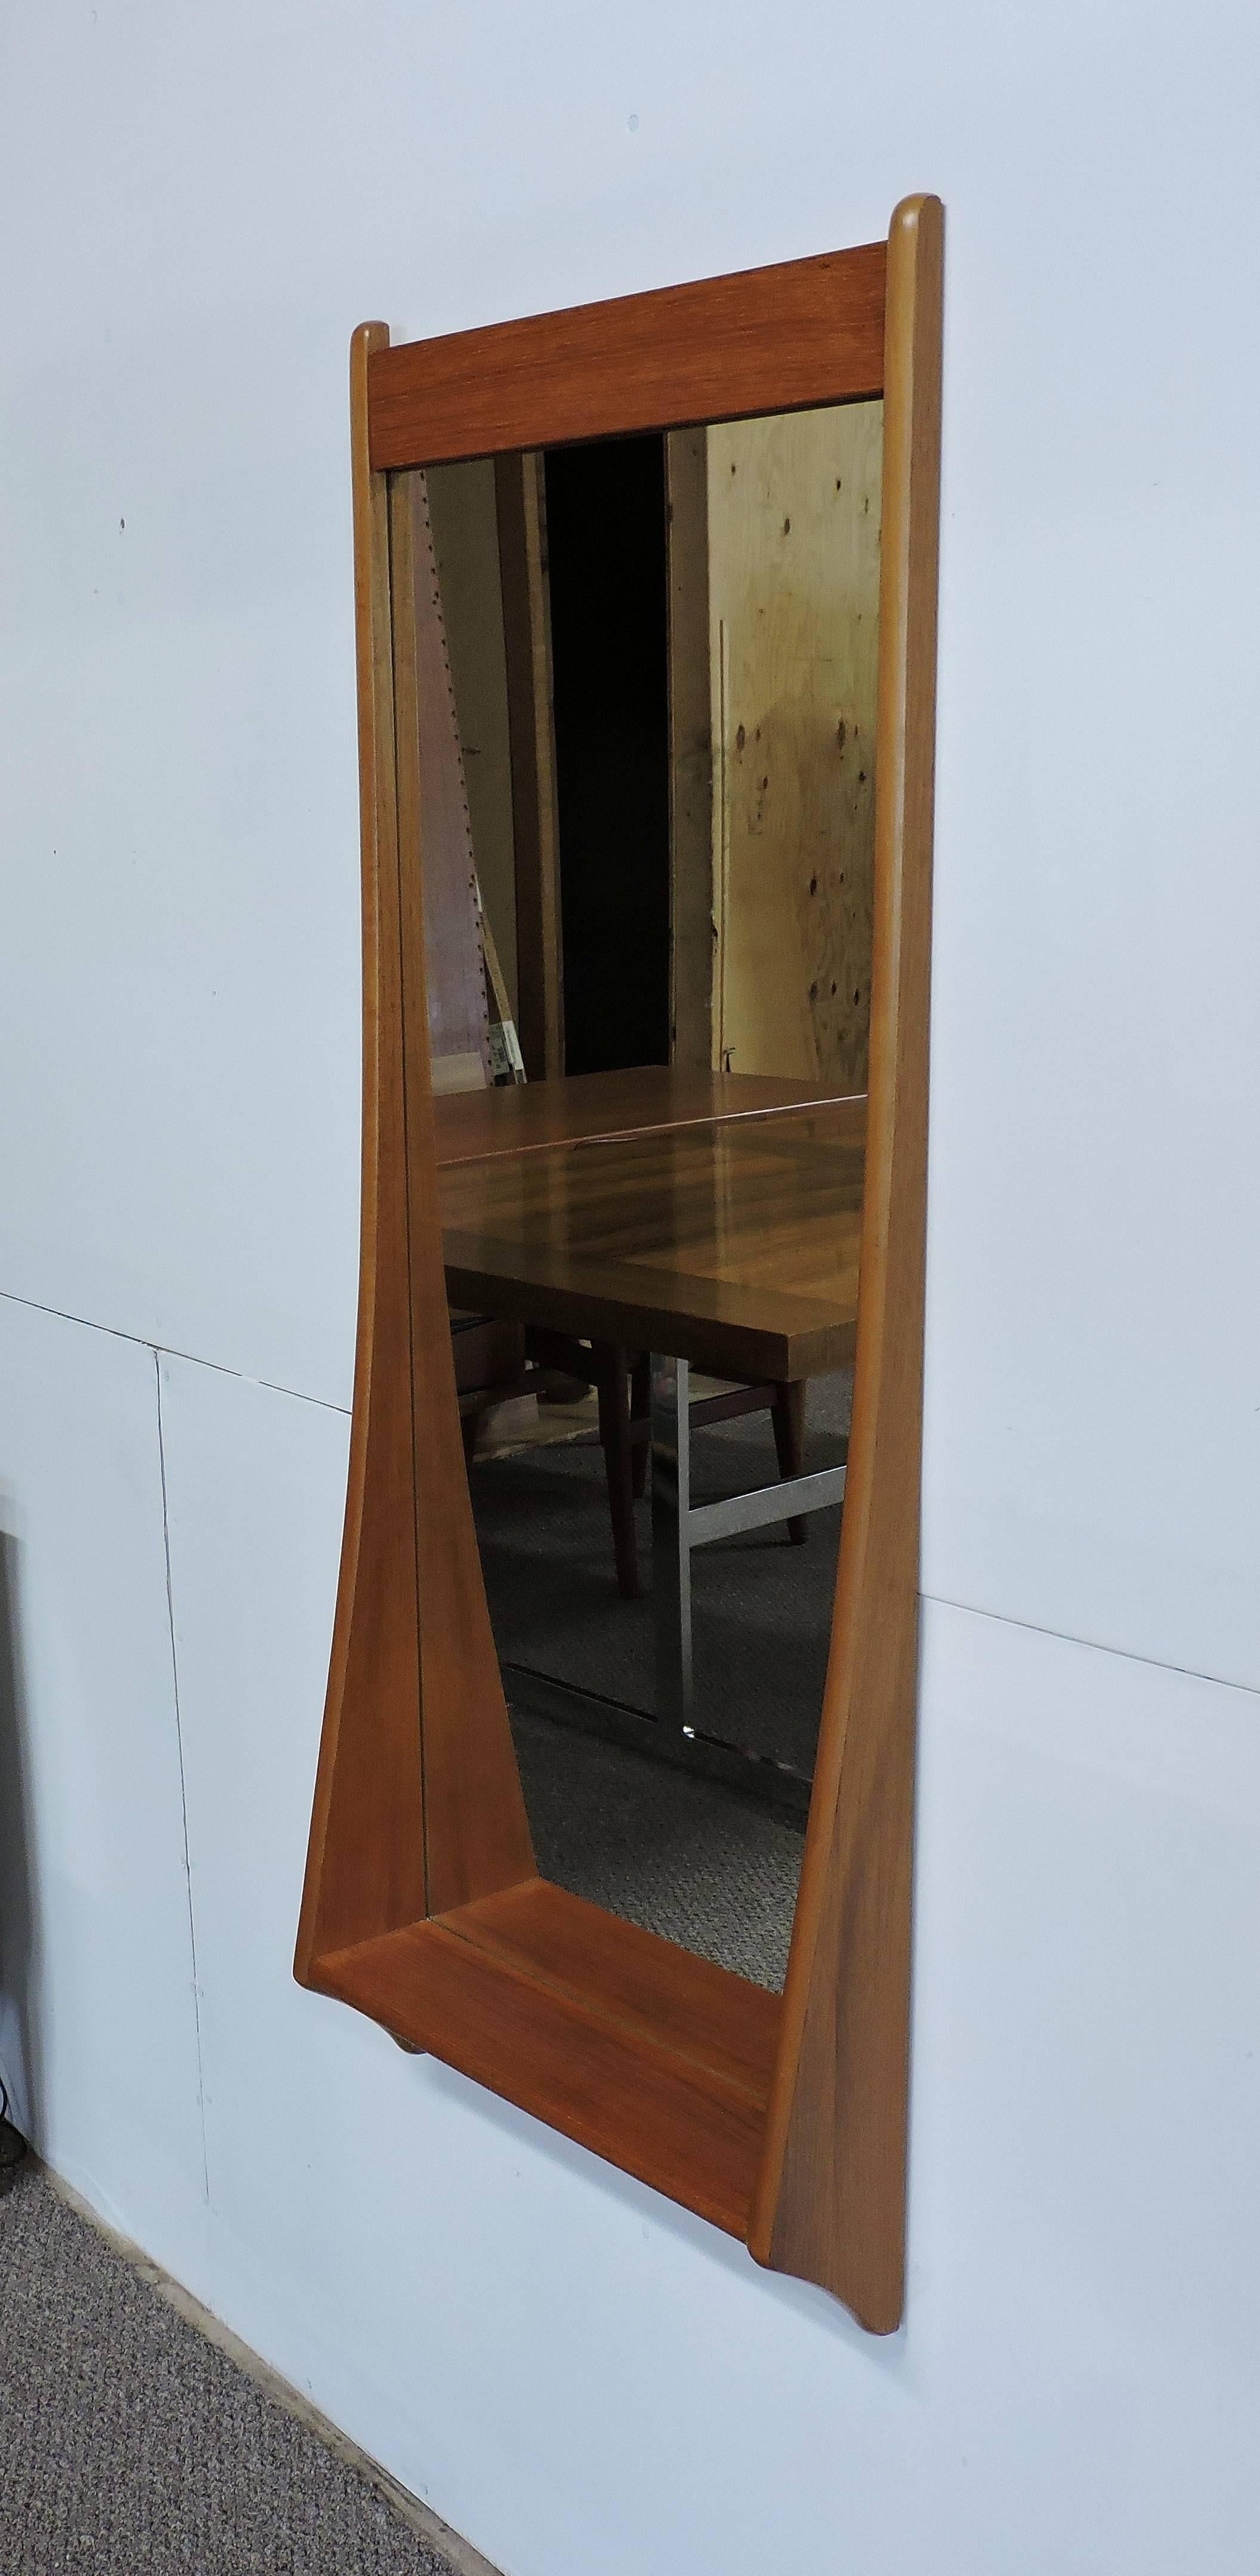 Beautiful wall mirror in teak by Pedersen and Hansen. This long mirror has sculpted and angled sides with a handy shelf on the bottom.